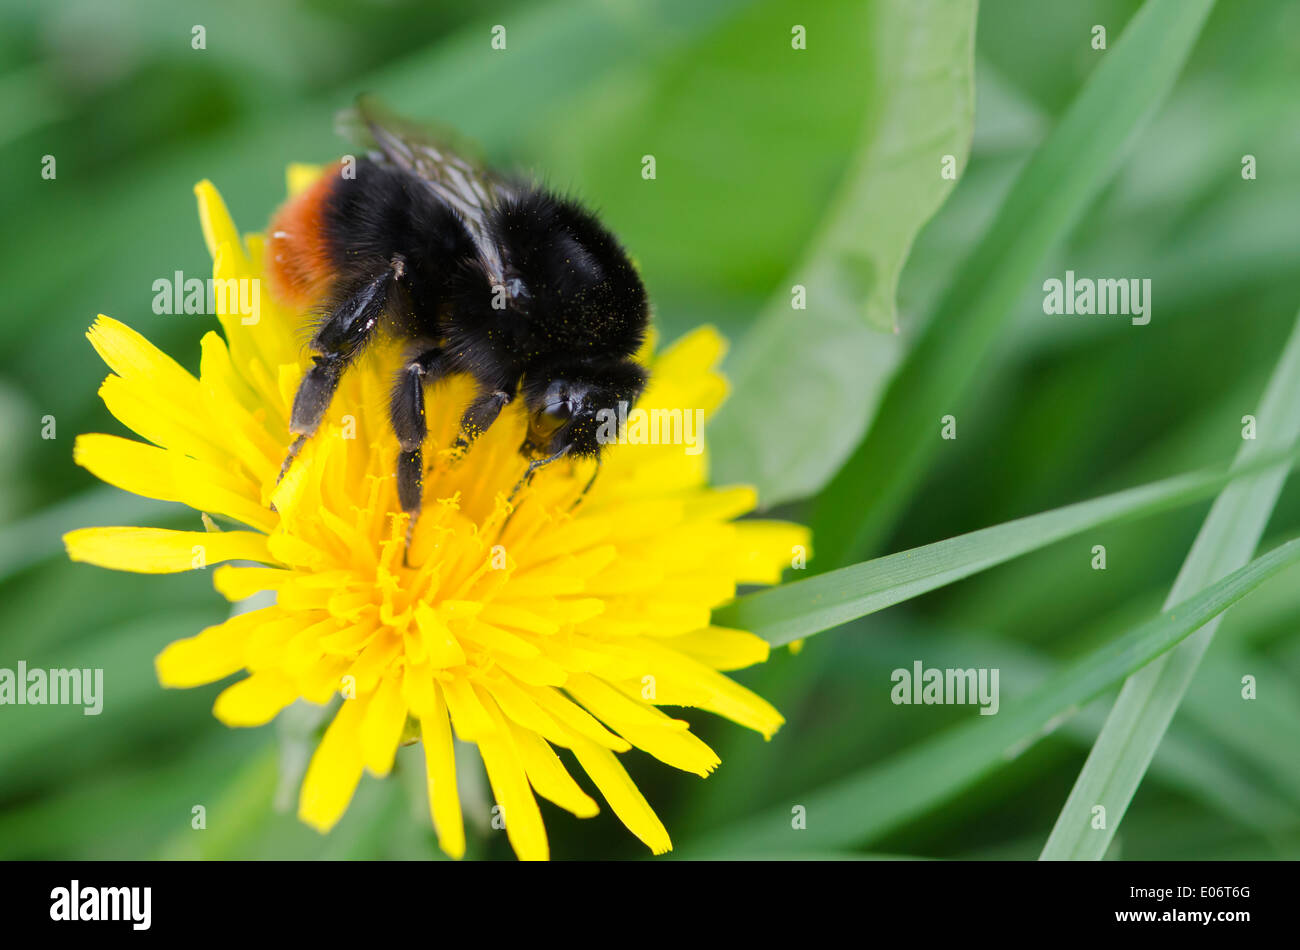 Orange-bottomed bumblebee on a Dandelion flower in a Cumbrian garden on a sunny Spring day. Stock Photo